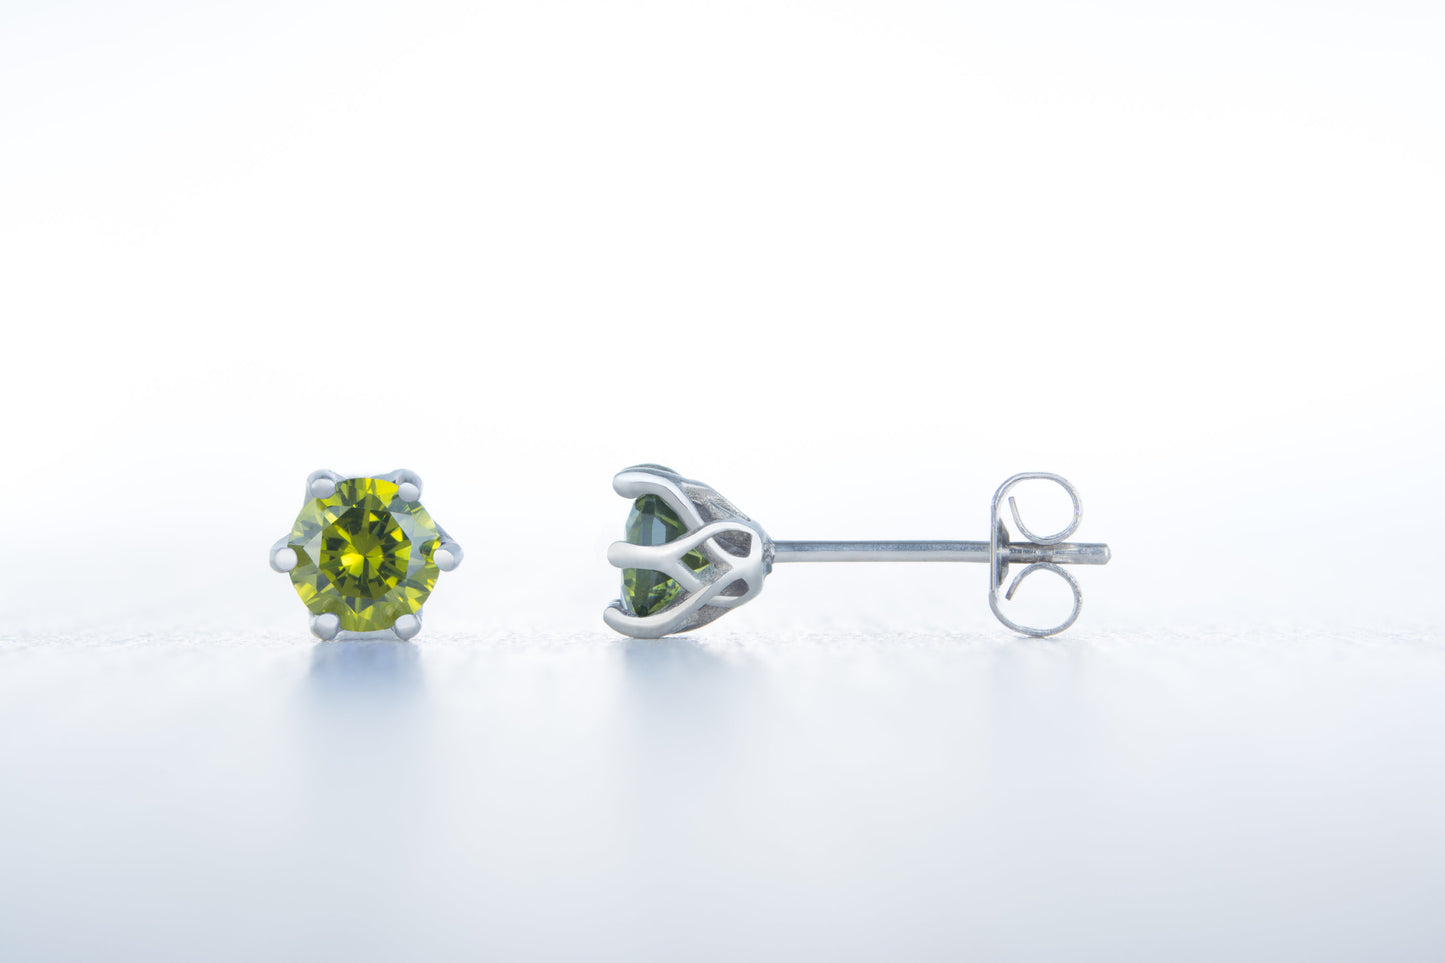 Natural Peridot stud earrings, available in titanium, white gold and surgical steel 4mm, 5mm and 6mm sizes